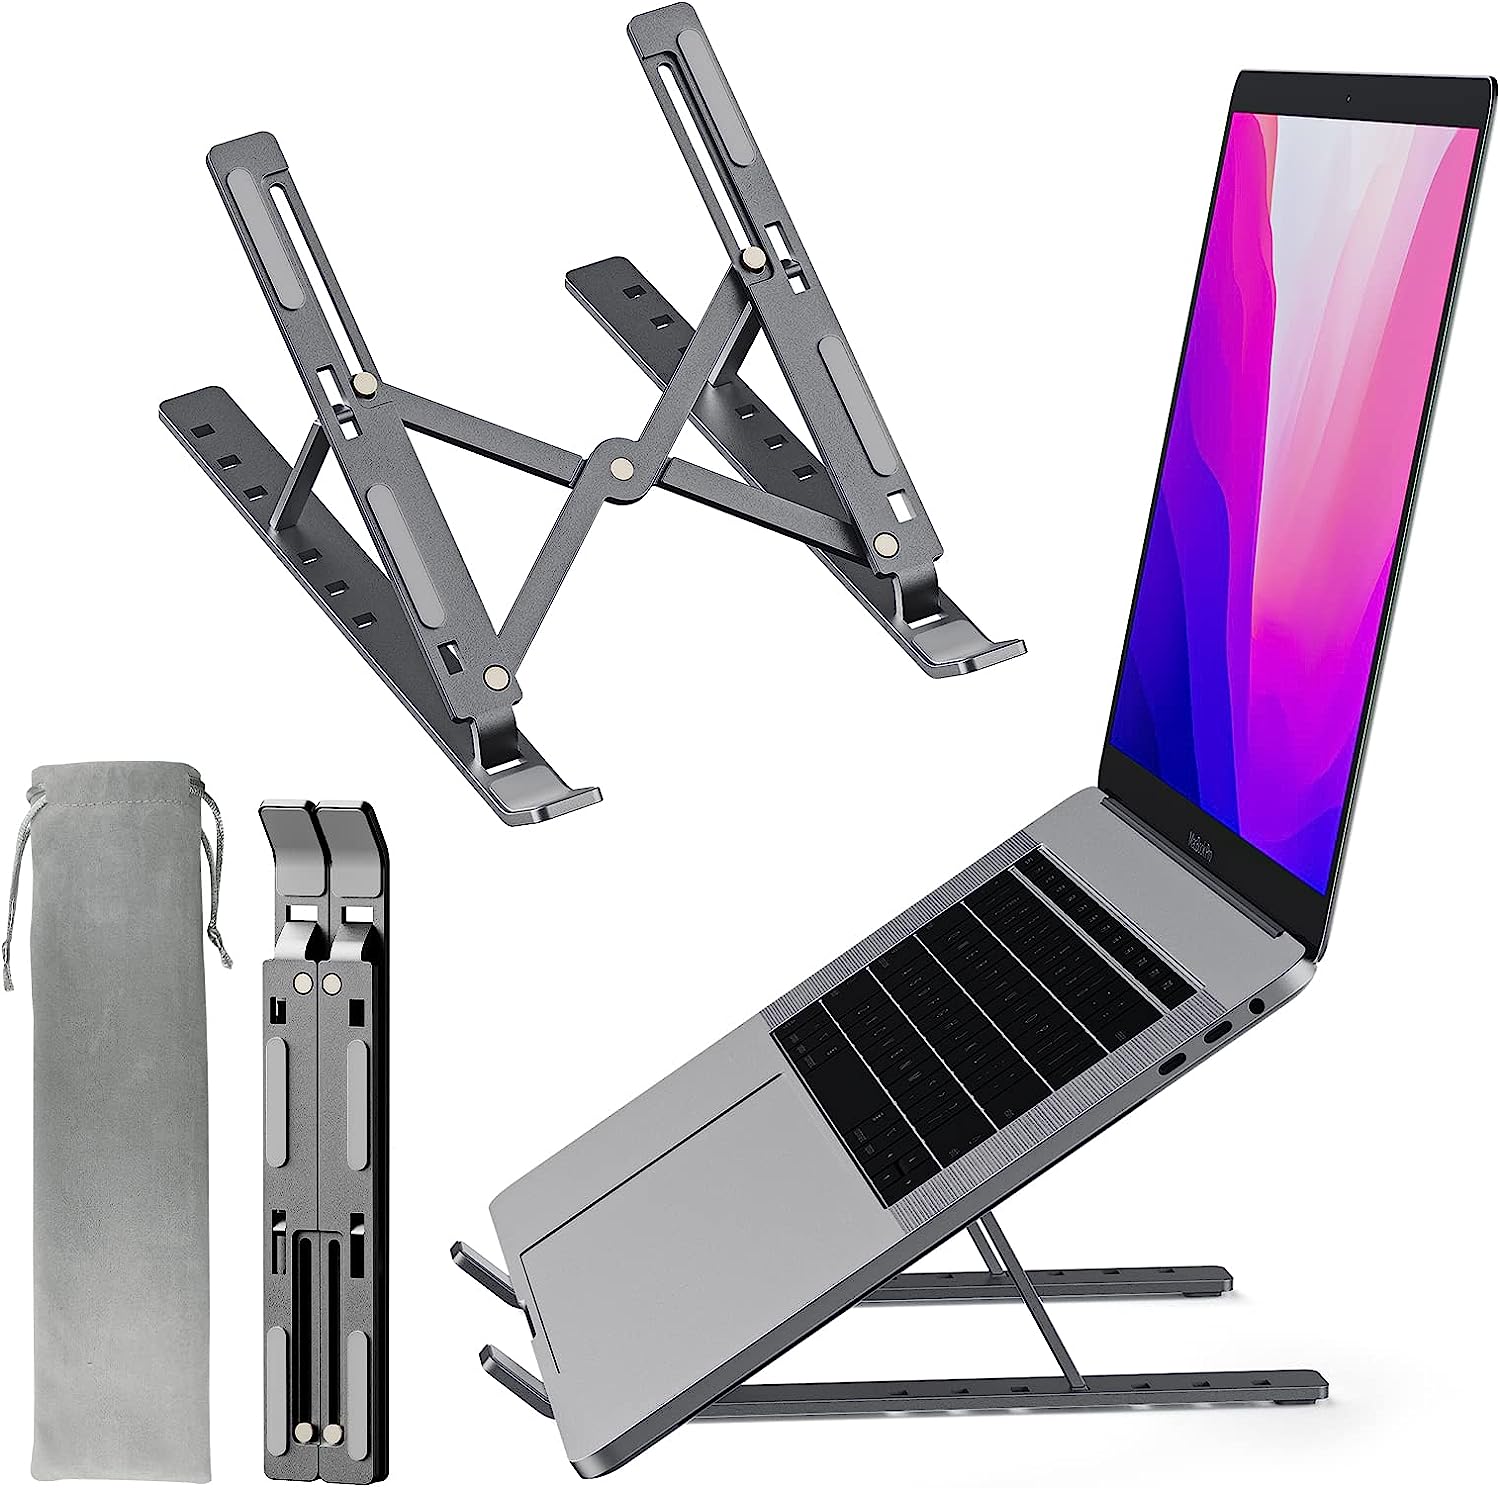 avakot Small Laptop Stand for Desk 7-Angle Adjustable [...]